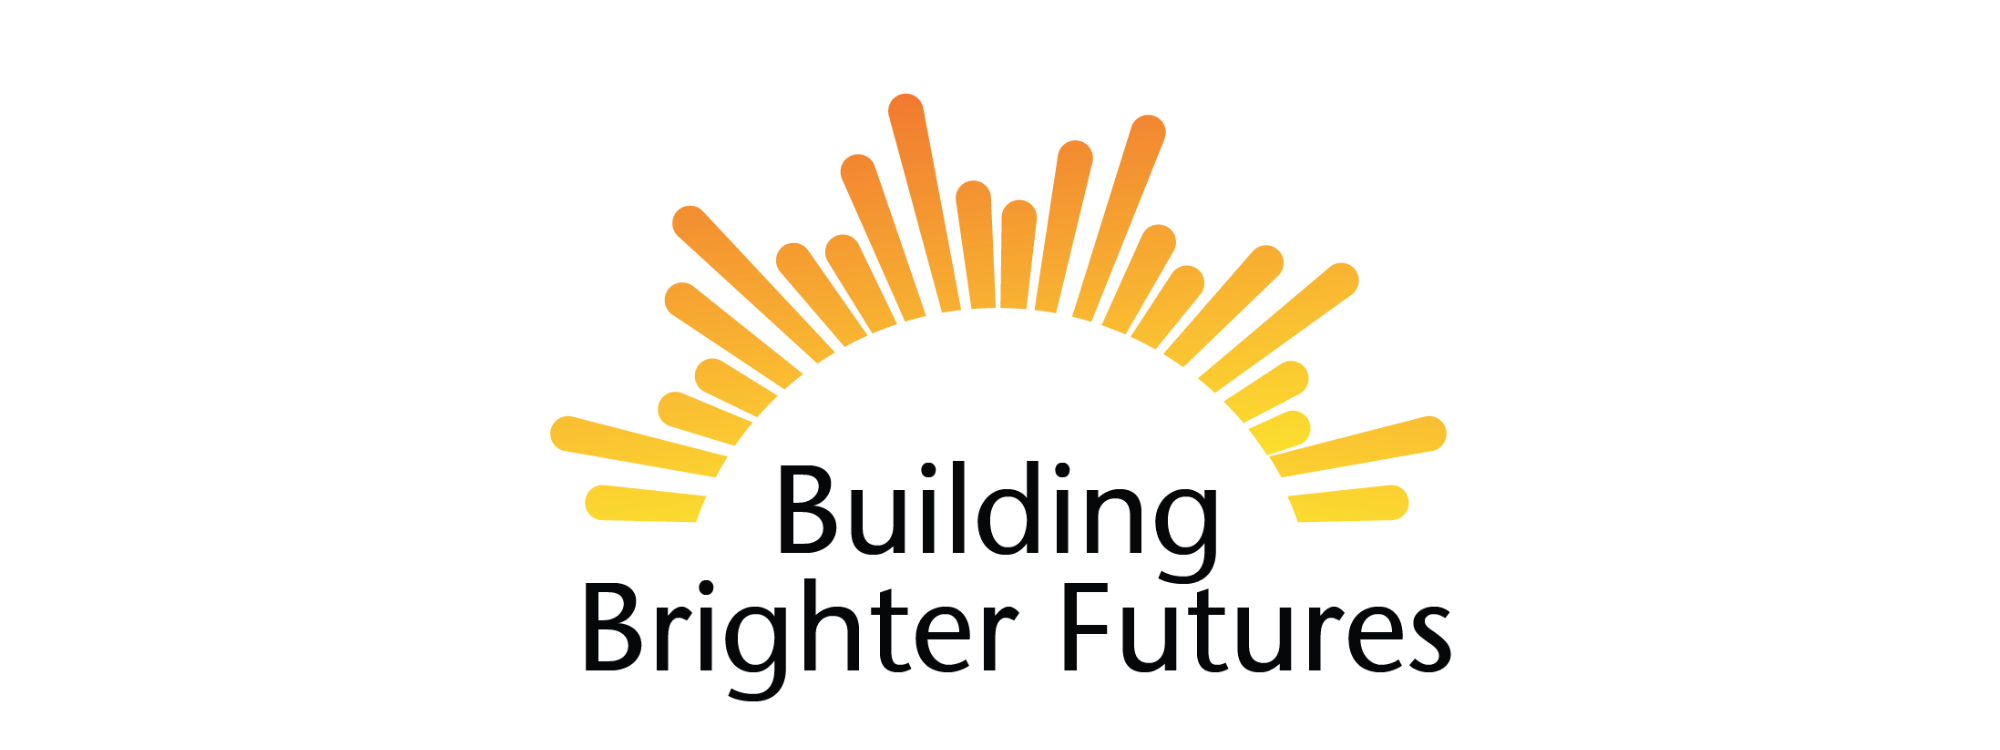 RELEASE: The Arc of Massachusetts’ Building Brighter Futures Gala and Auction a Success, Raises Over $220,000 to Support Key Programs and Services